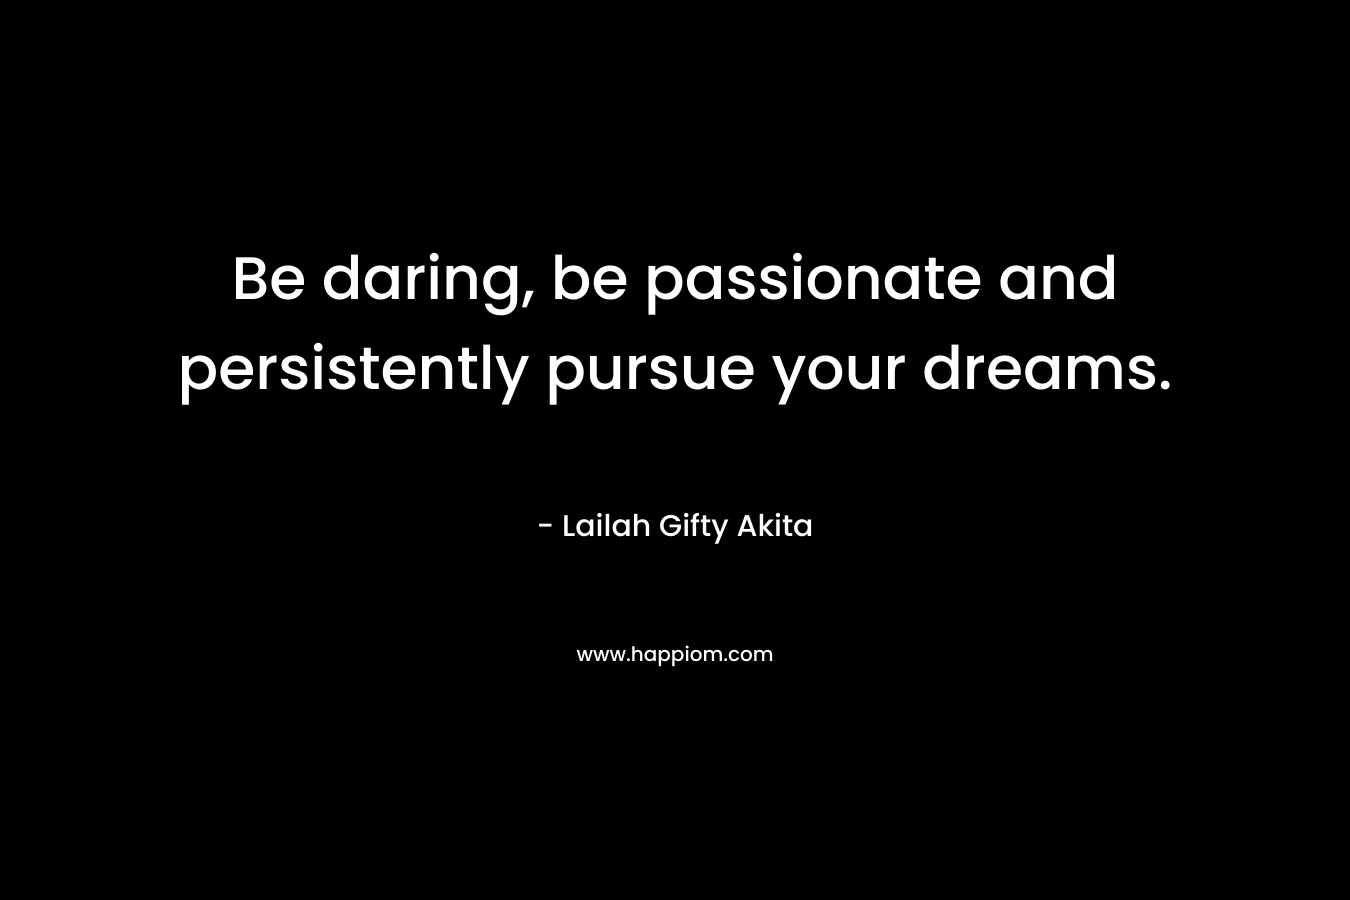 Be daring, be passionate and persistently pursue your dreams.